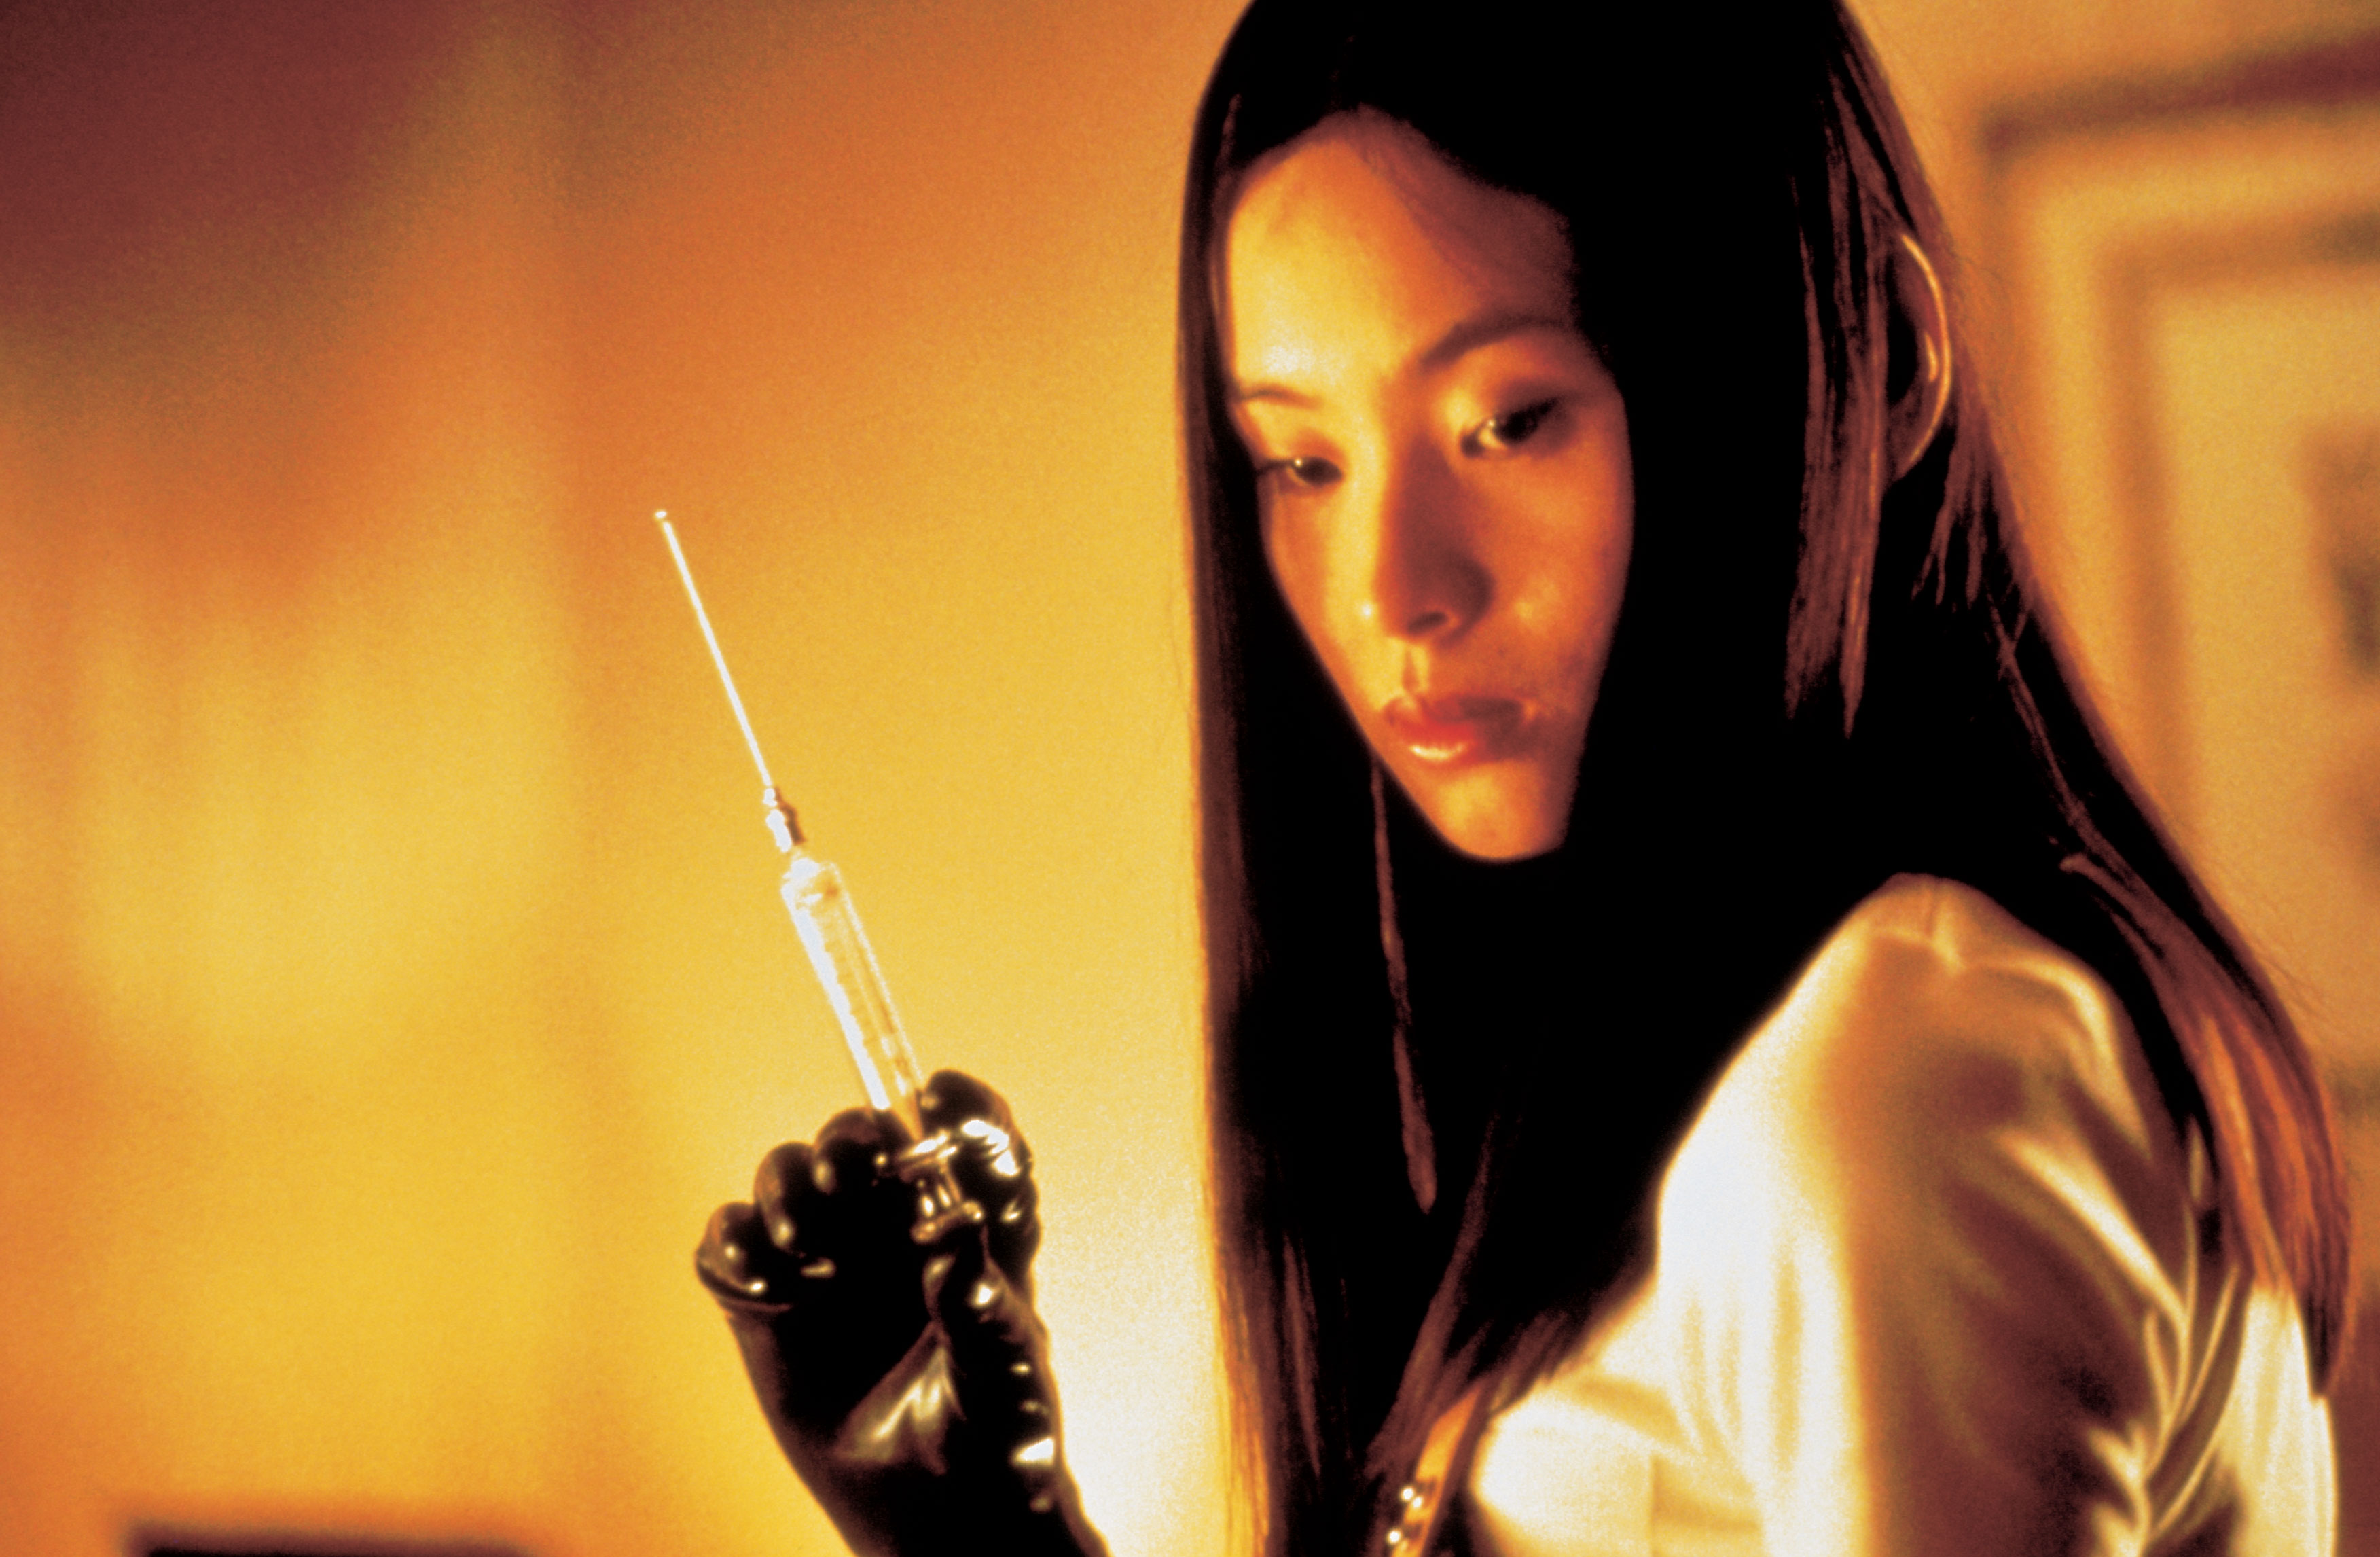 Classic Japanese Horror Film Audition Being Remade In America